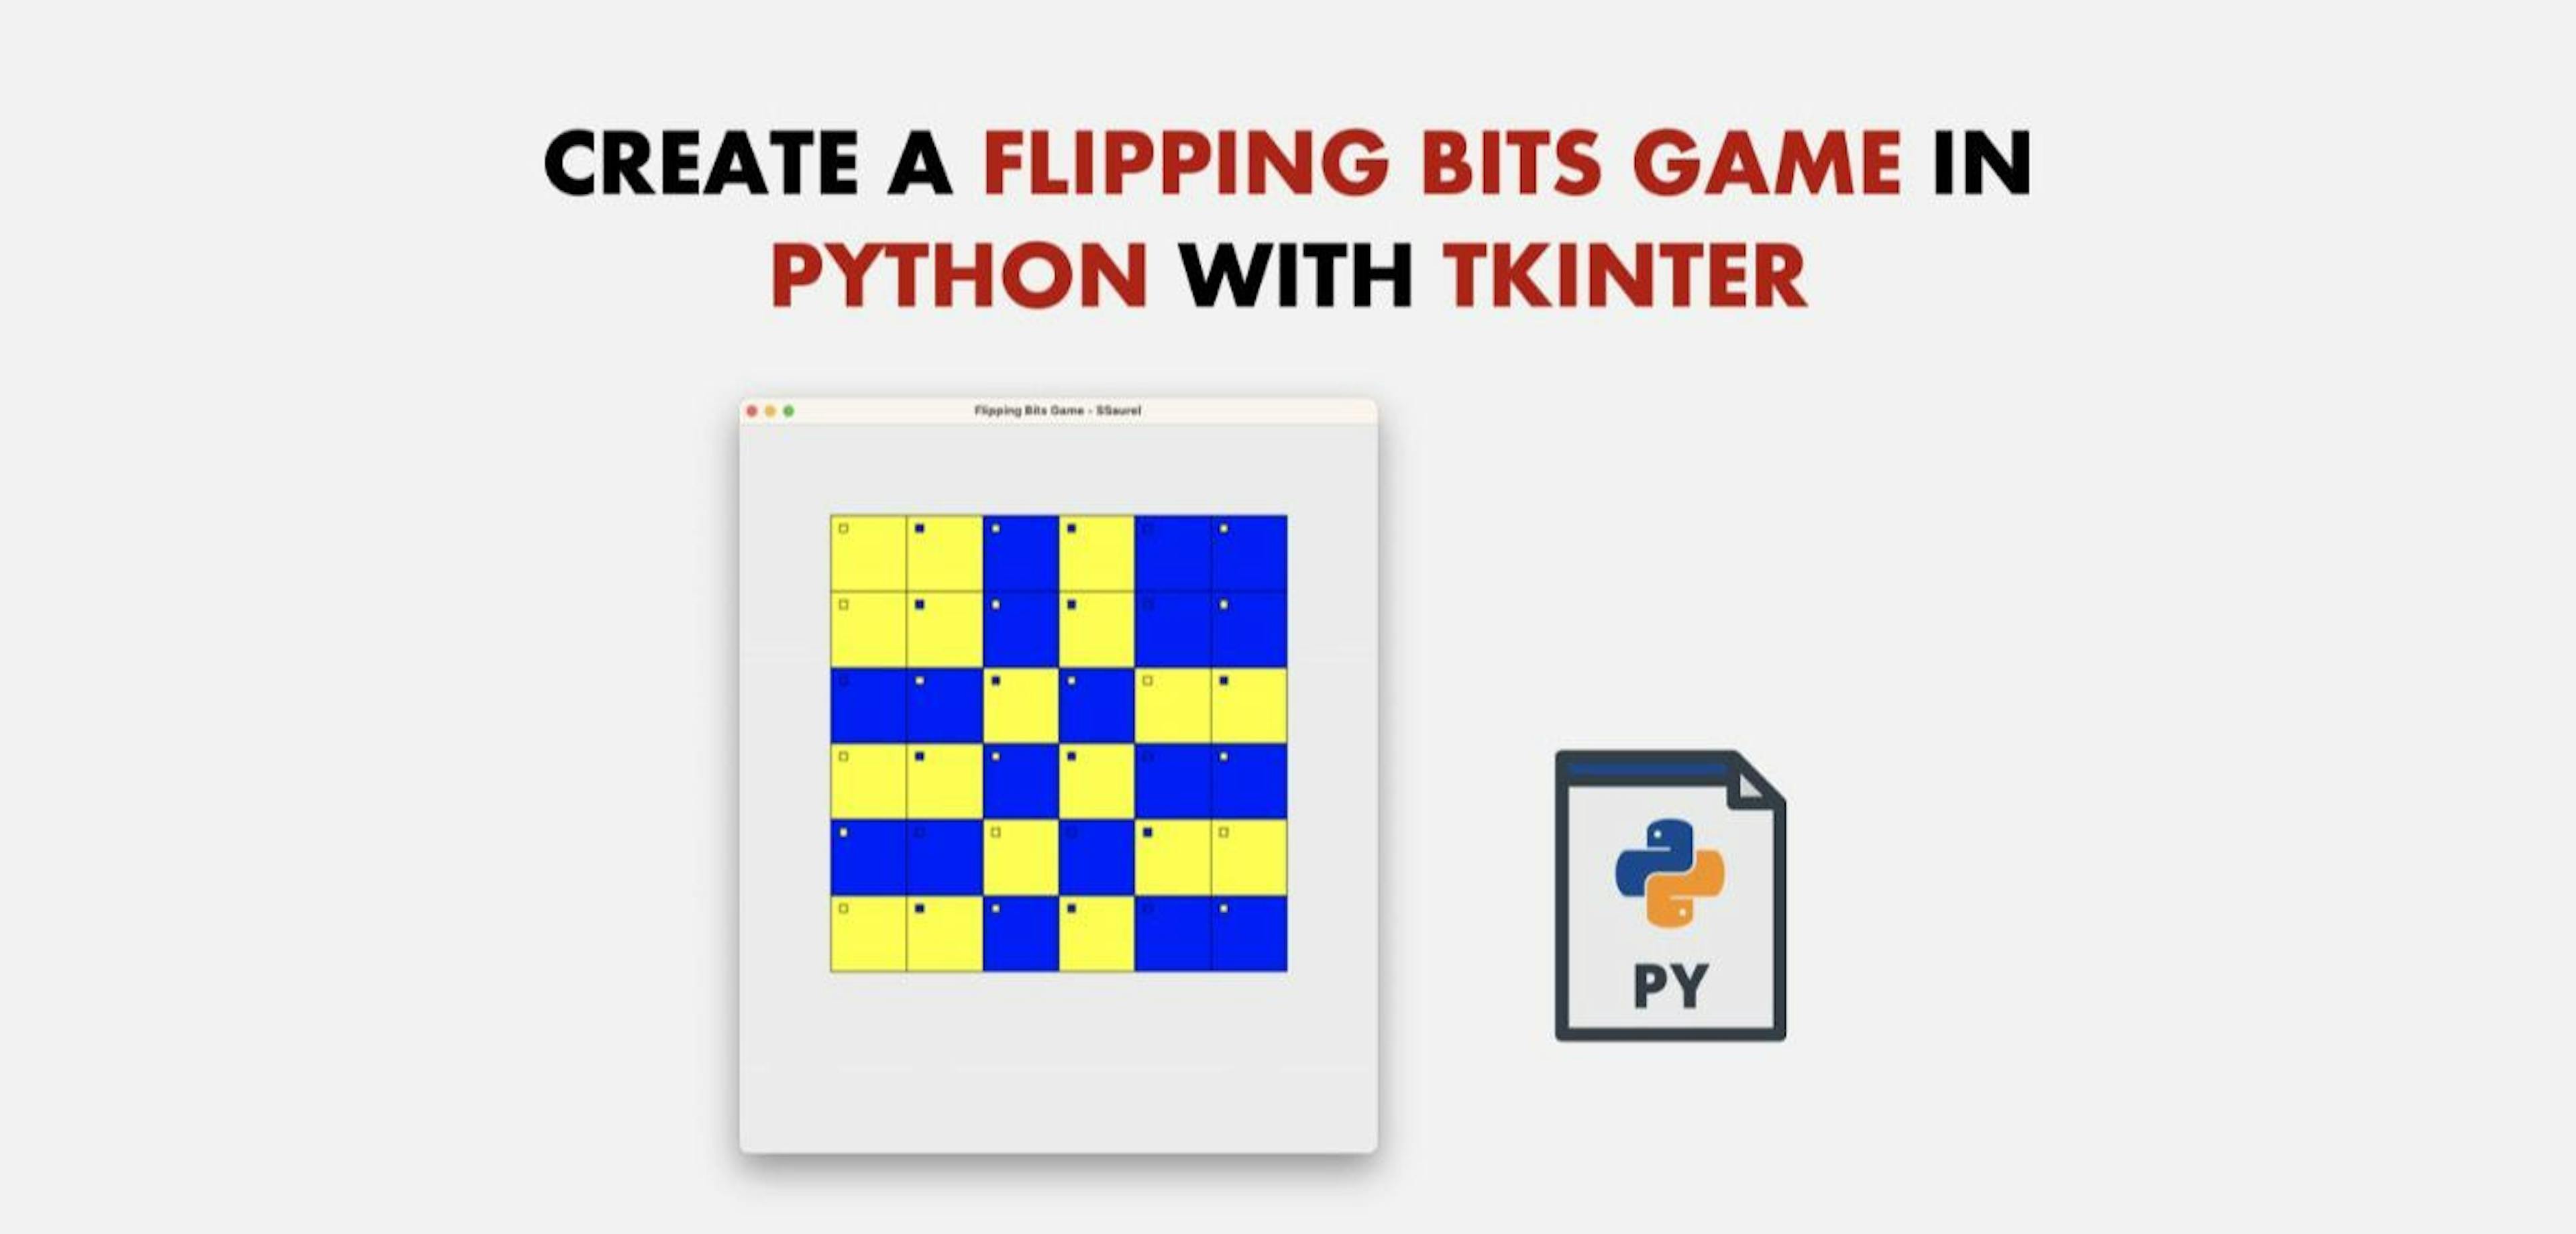 featured image - Learning to Make a GUI in Python With Tkinter by Creating a Flipping Bits Game